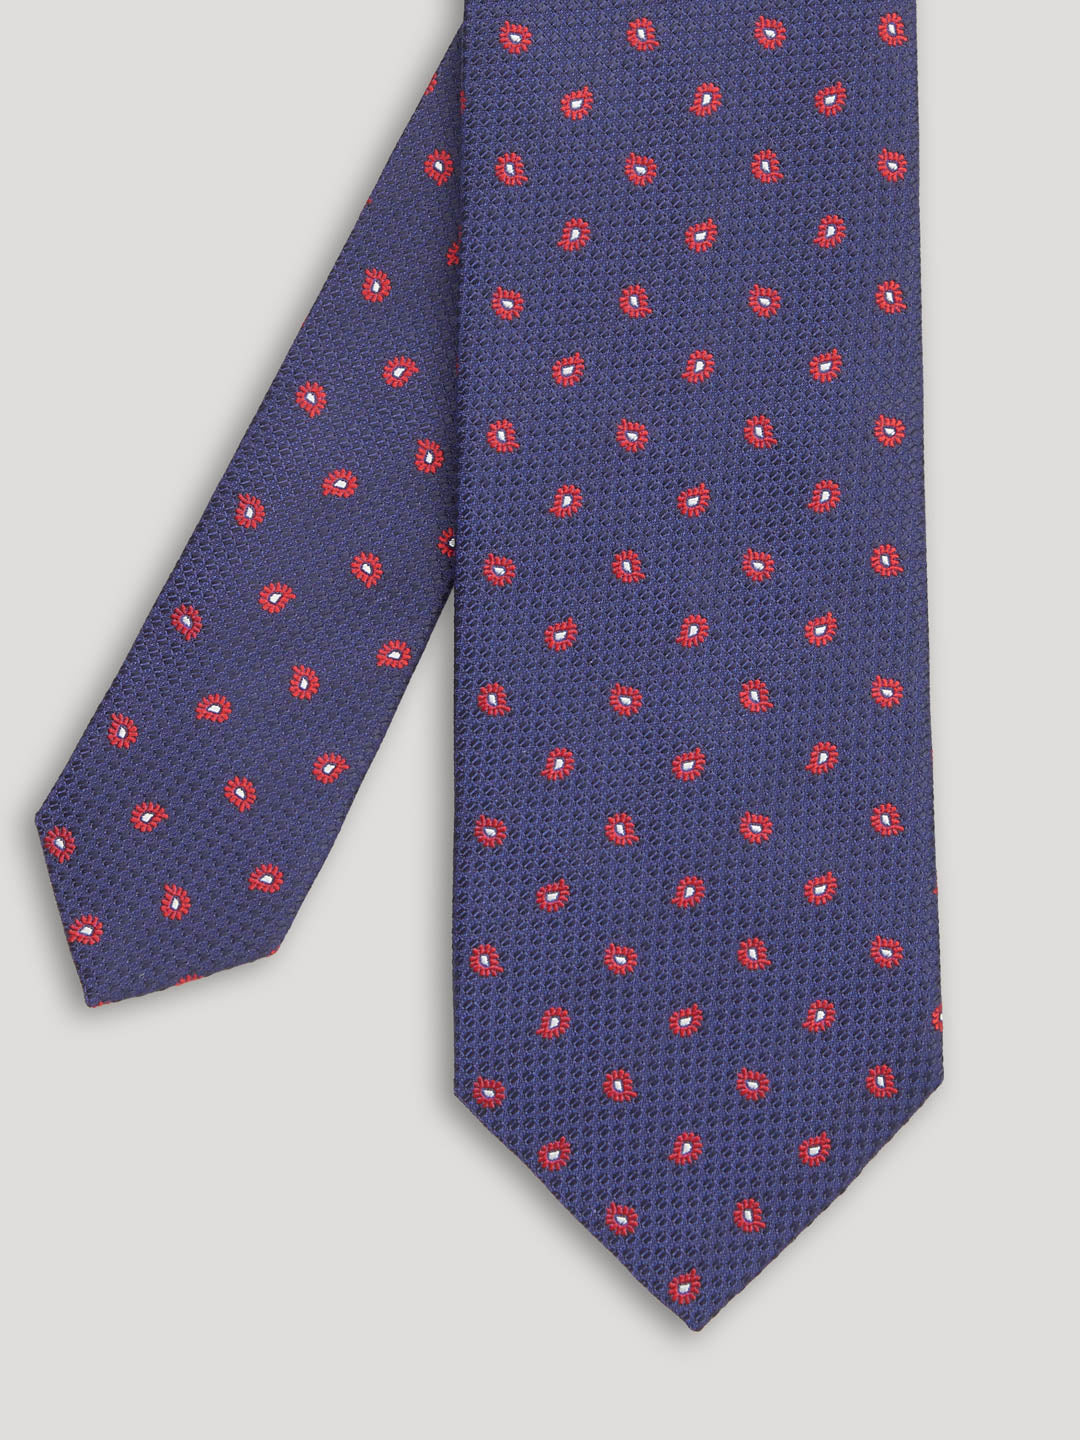 Red and blue tie with large pattern